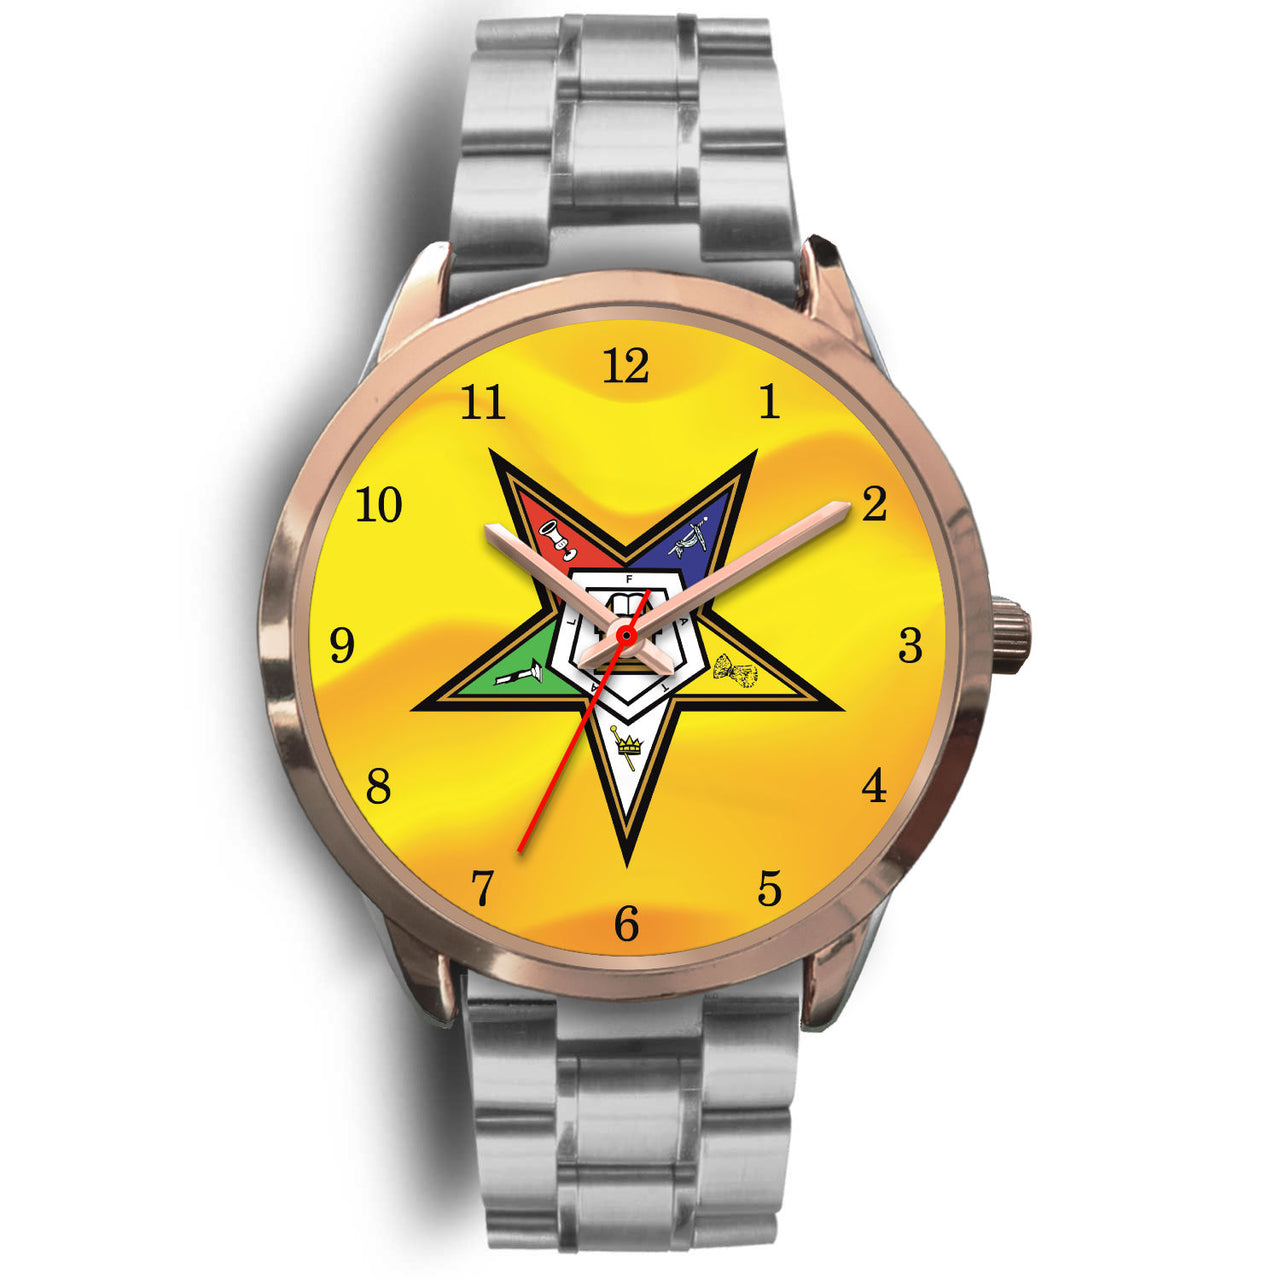 OES FATAL Watch  01A  Gold-Gold - JaZazzy 